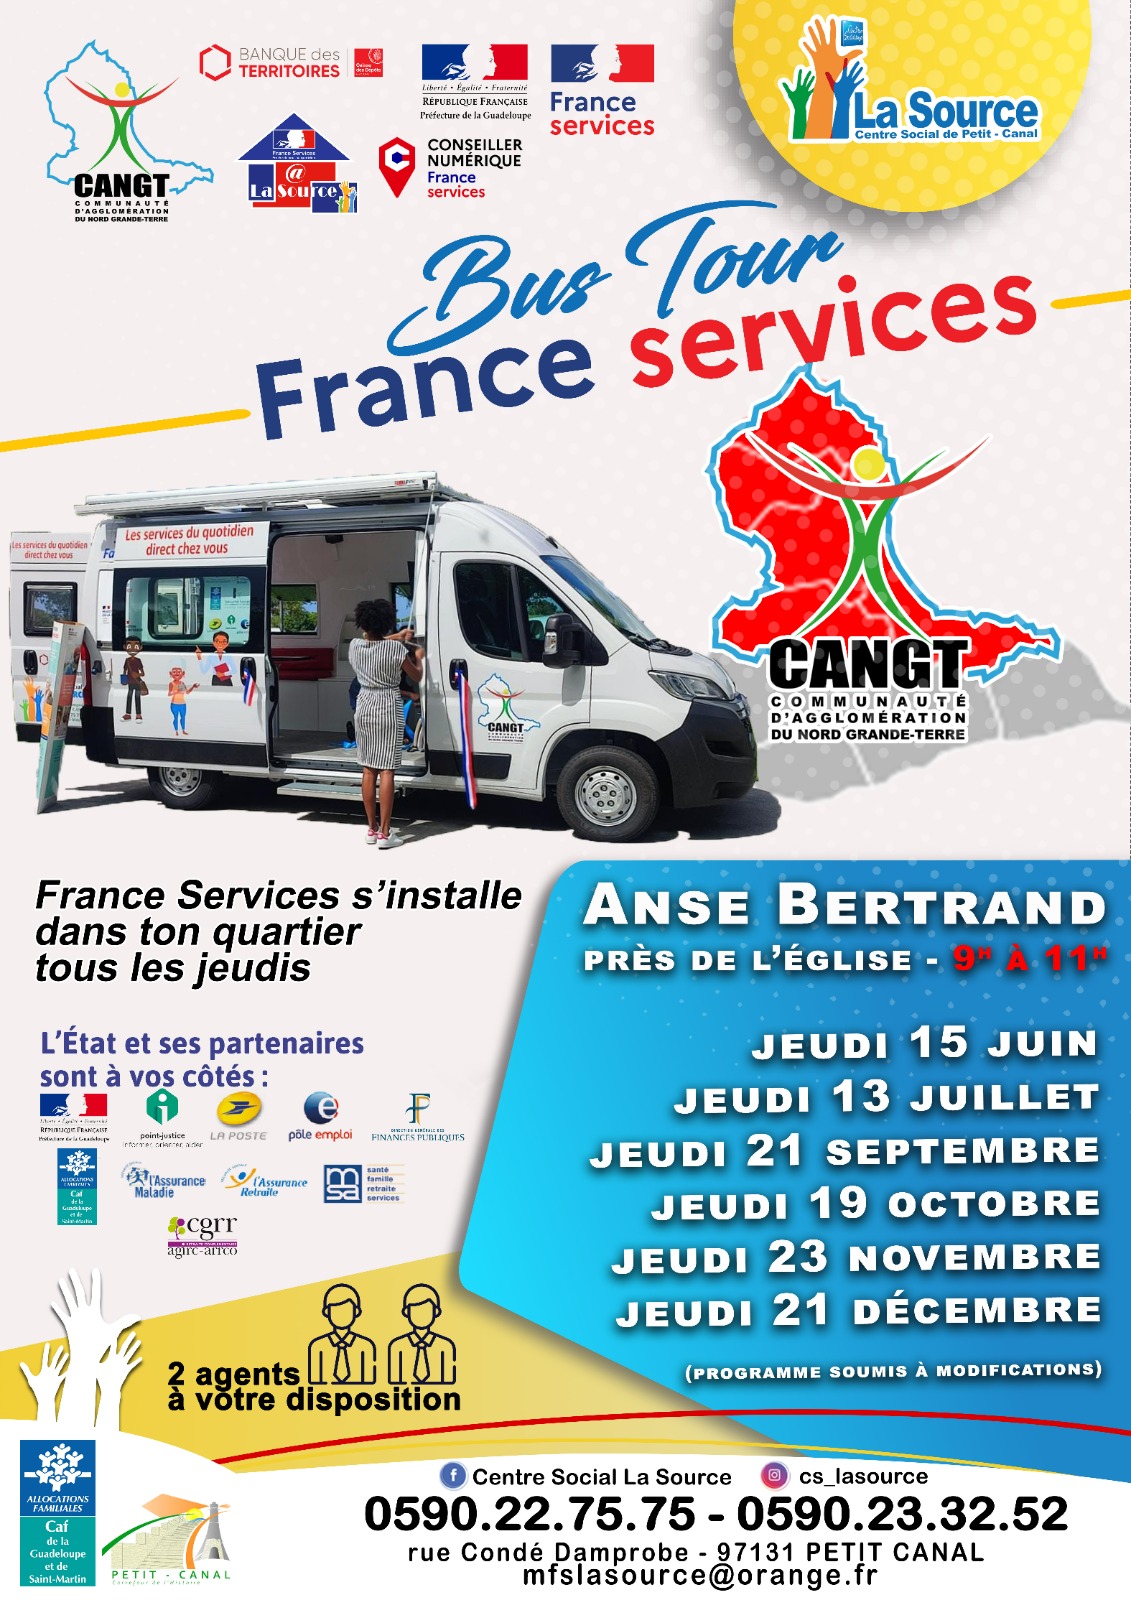 You are currently viewing France Service sur le territoire ansois